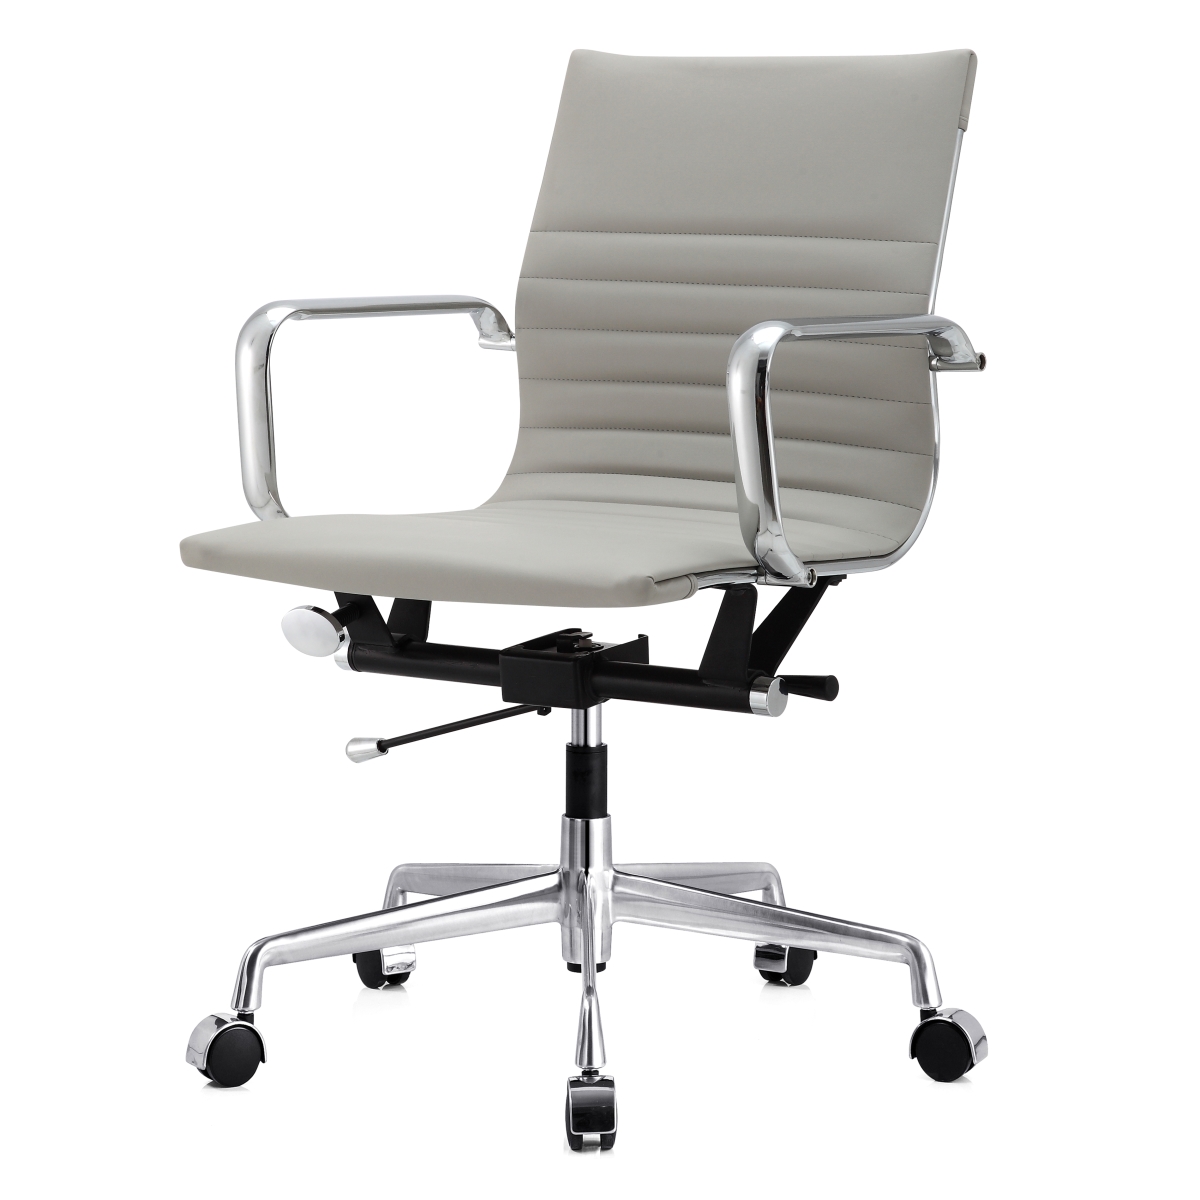 348-gry M348 Office Chair In Vegan Leather - Chrome & Gray